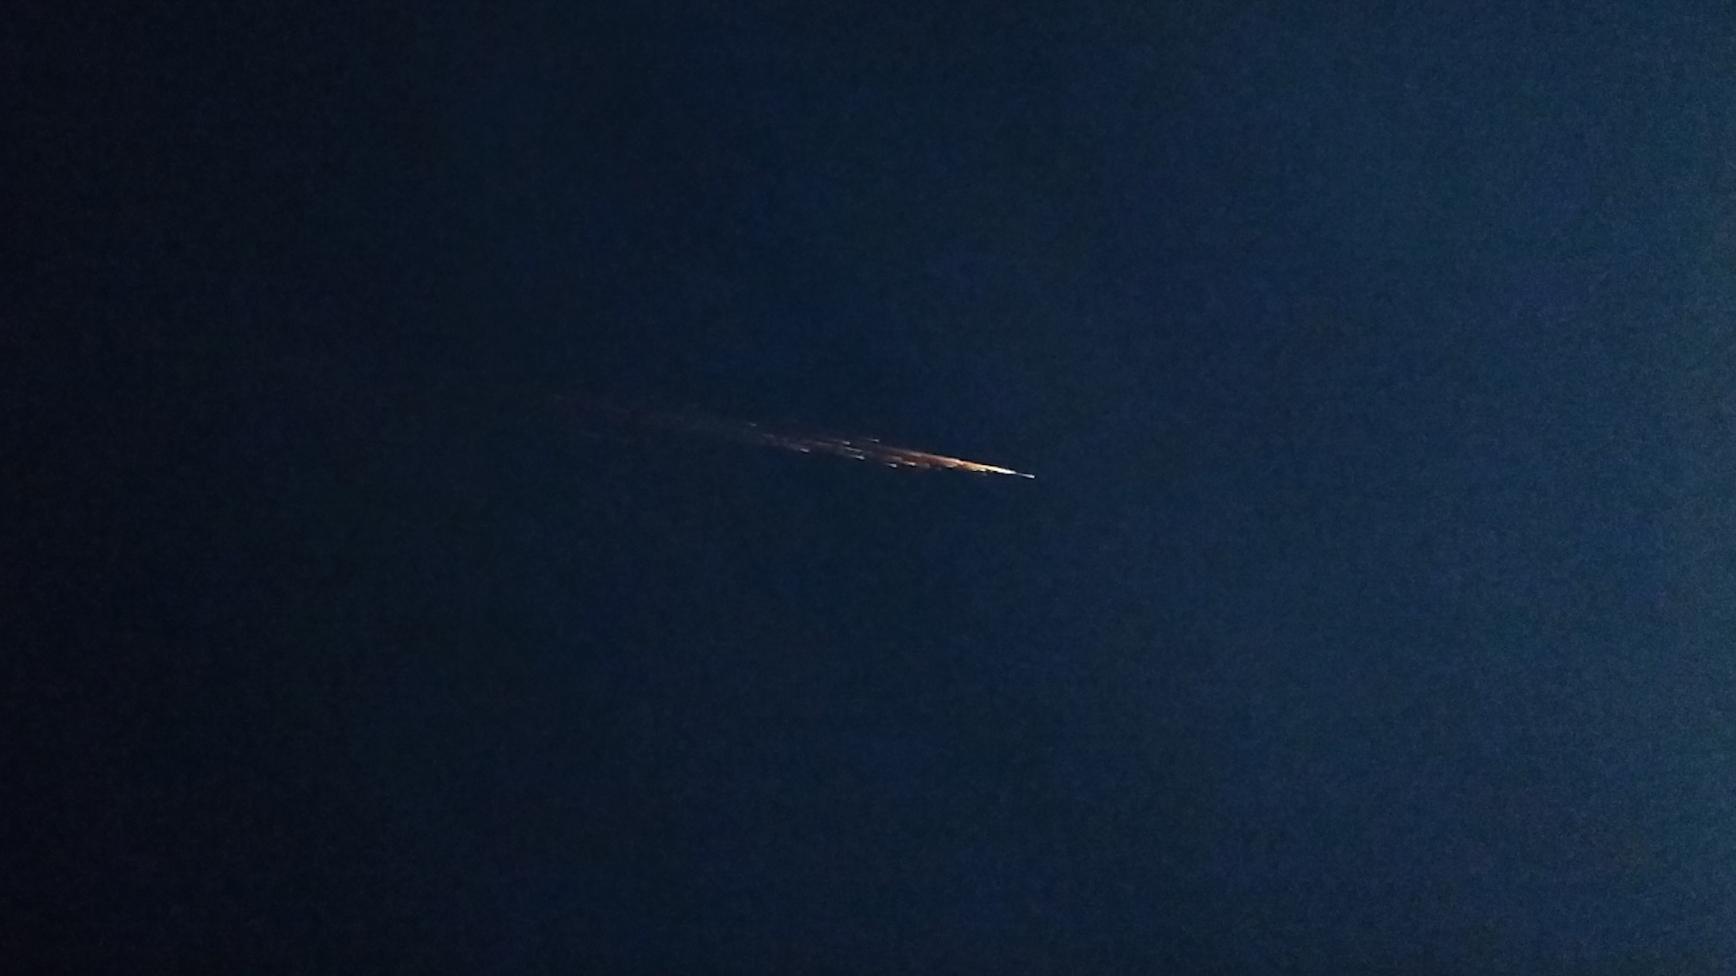 Chinese space junk falls to Earth over Southern California, creating spectacular fireball (photos, video) Space